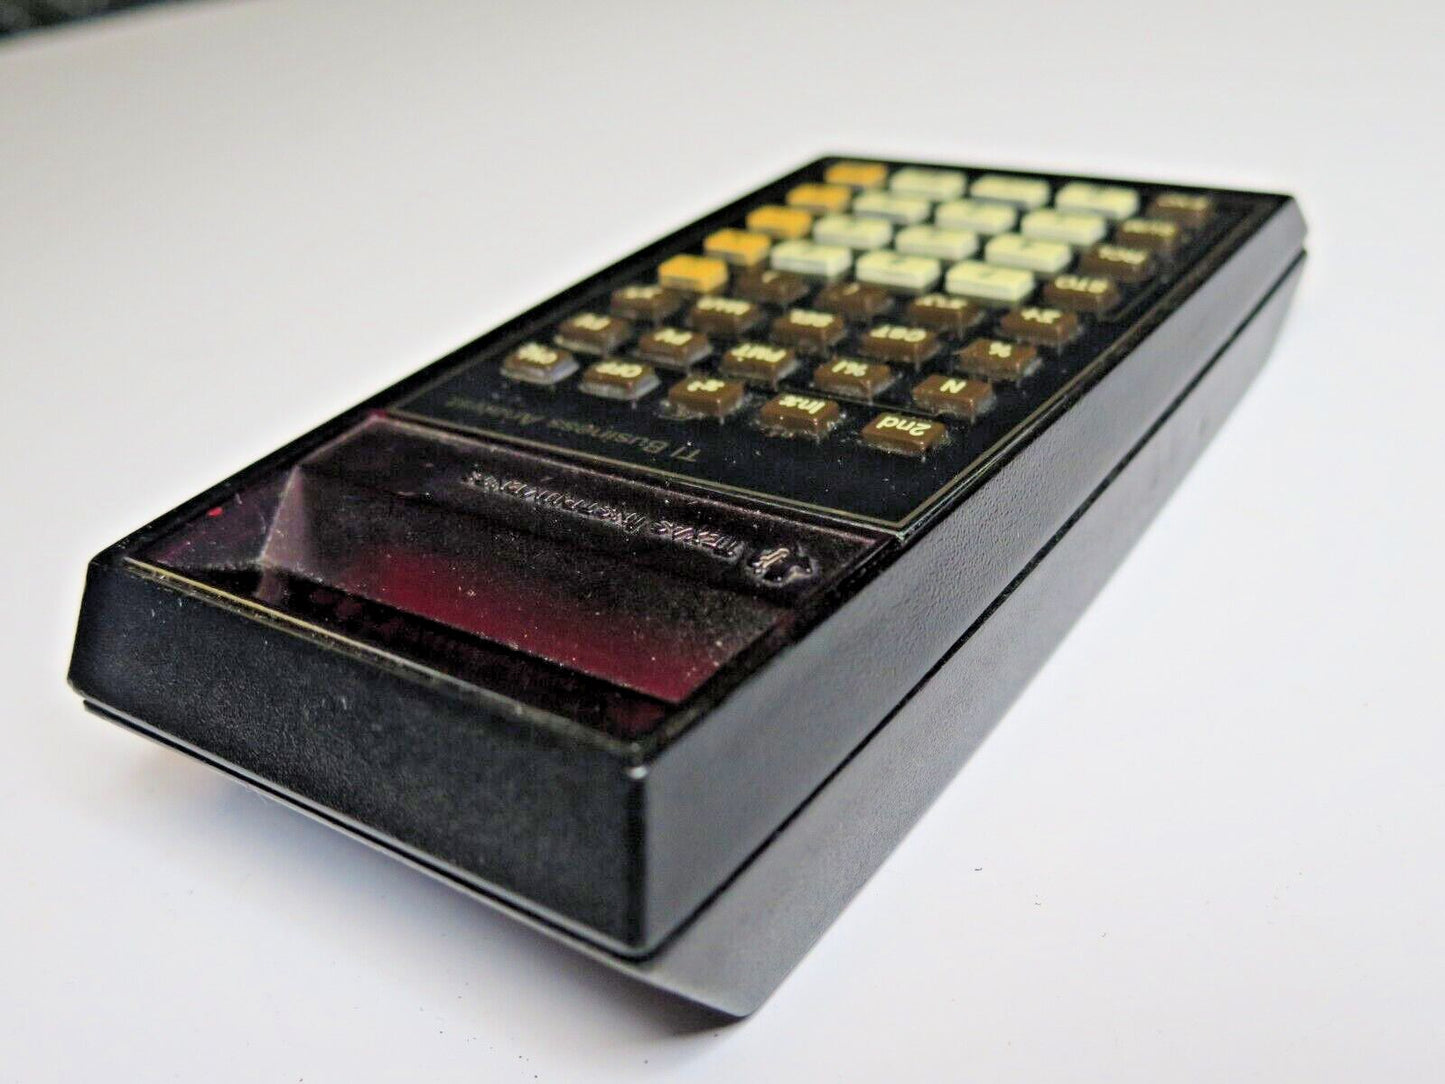 Vintage Texas Instruments TI Business Analyst Handheld Electronic Calculator '76